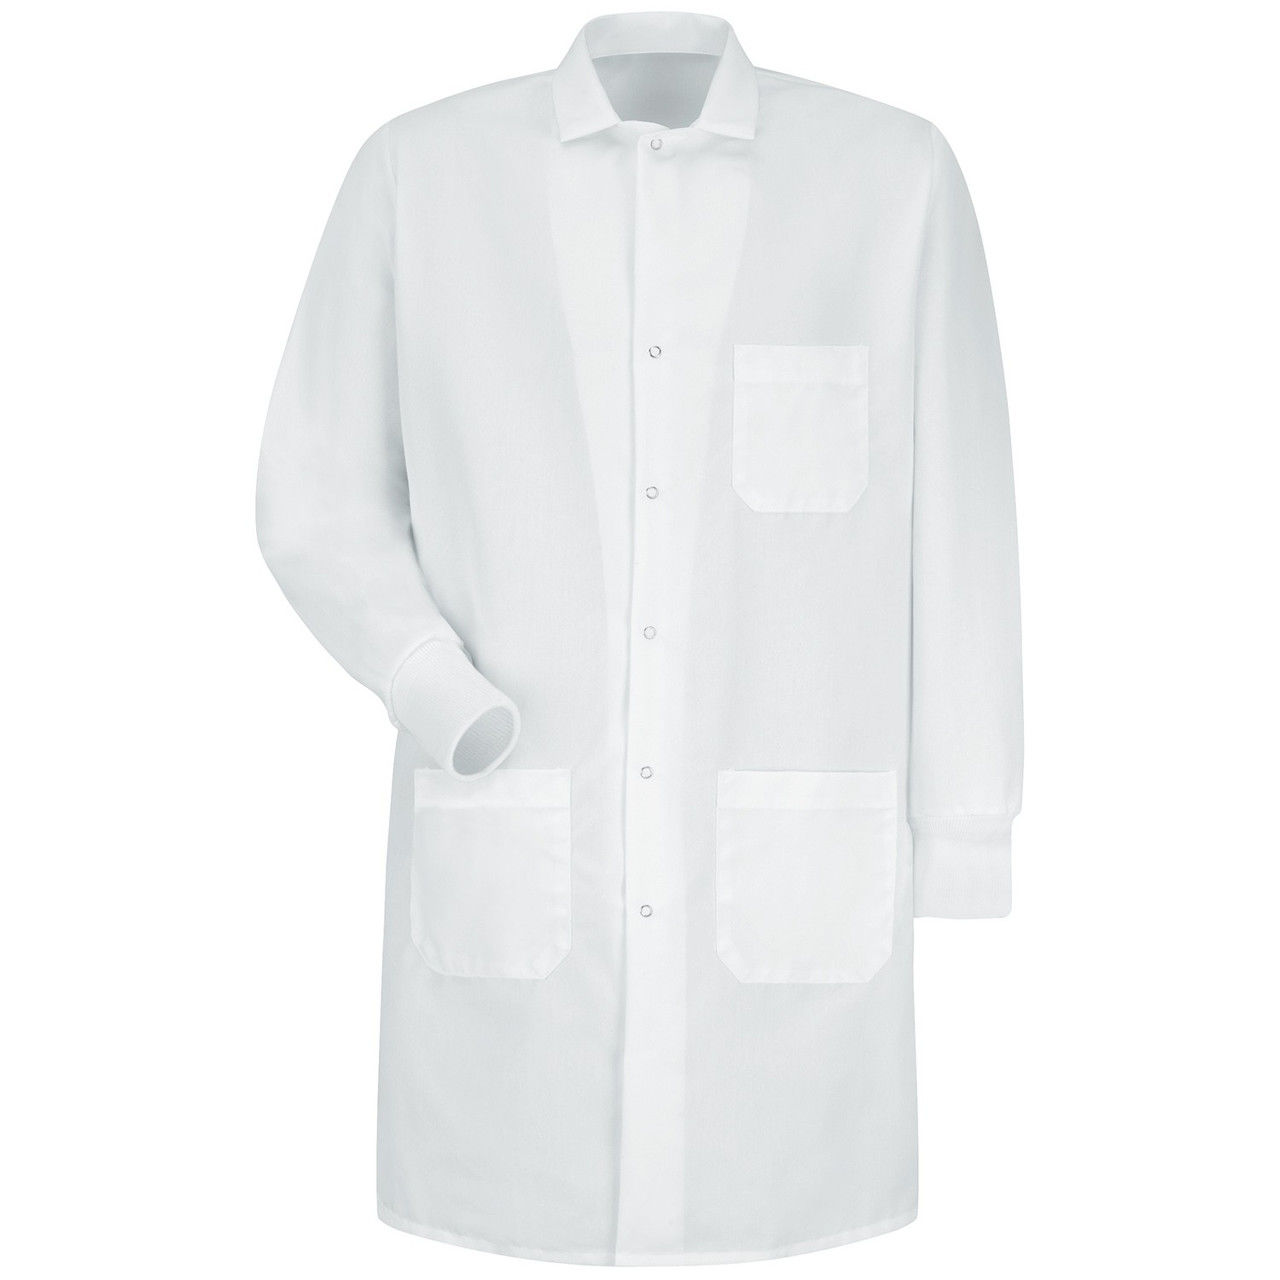 Does the lab coat with cuffed sleeves have any specific type of pockets?